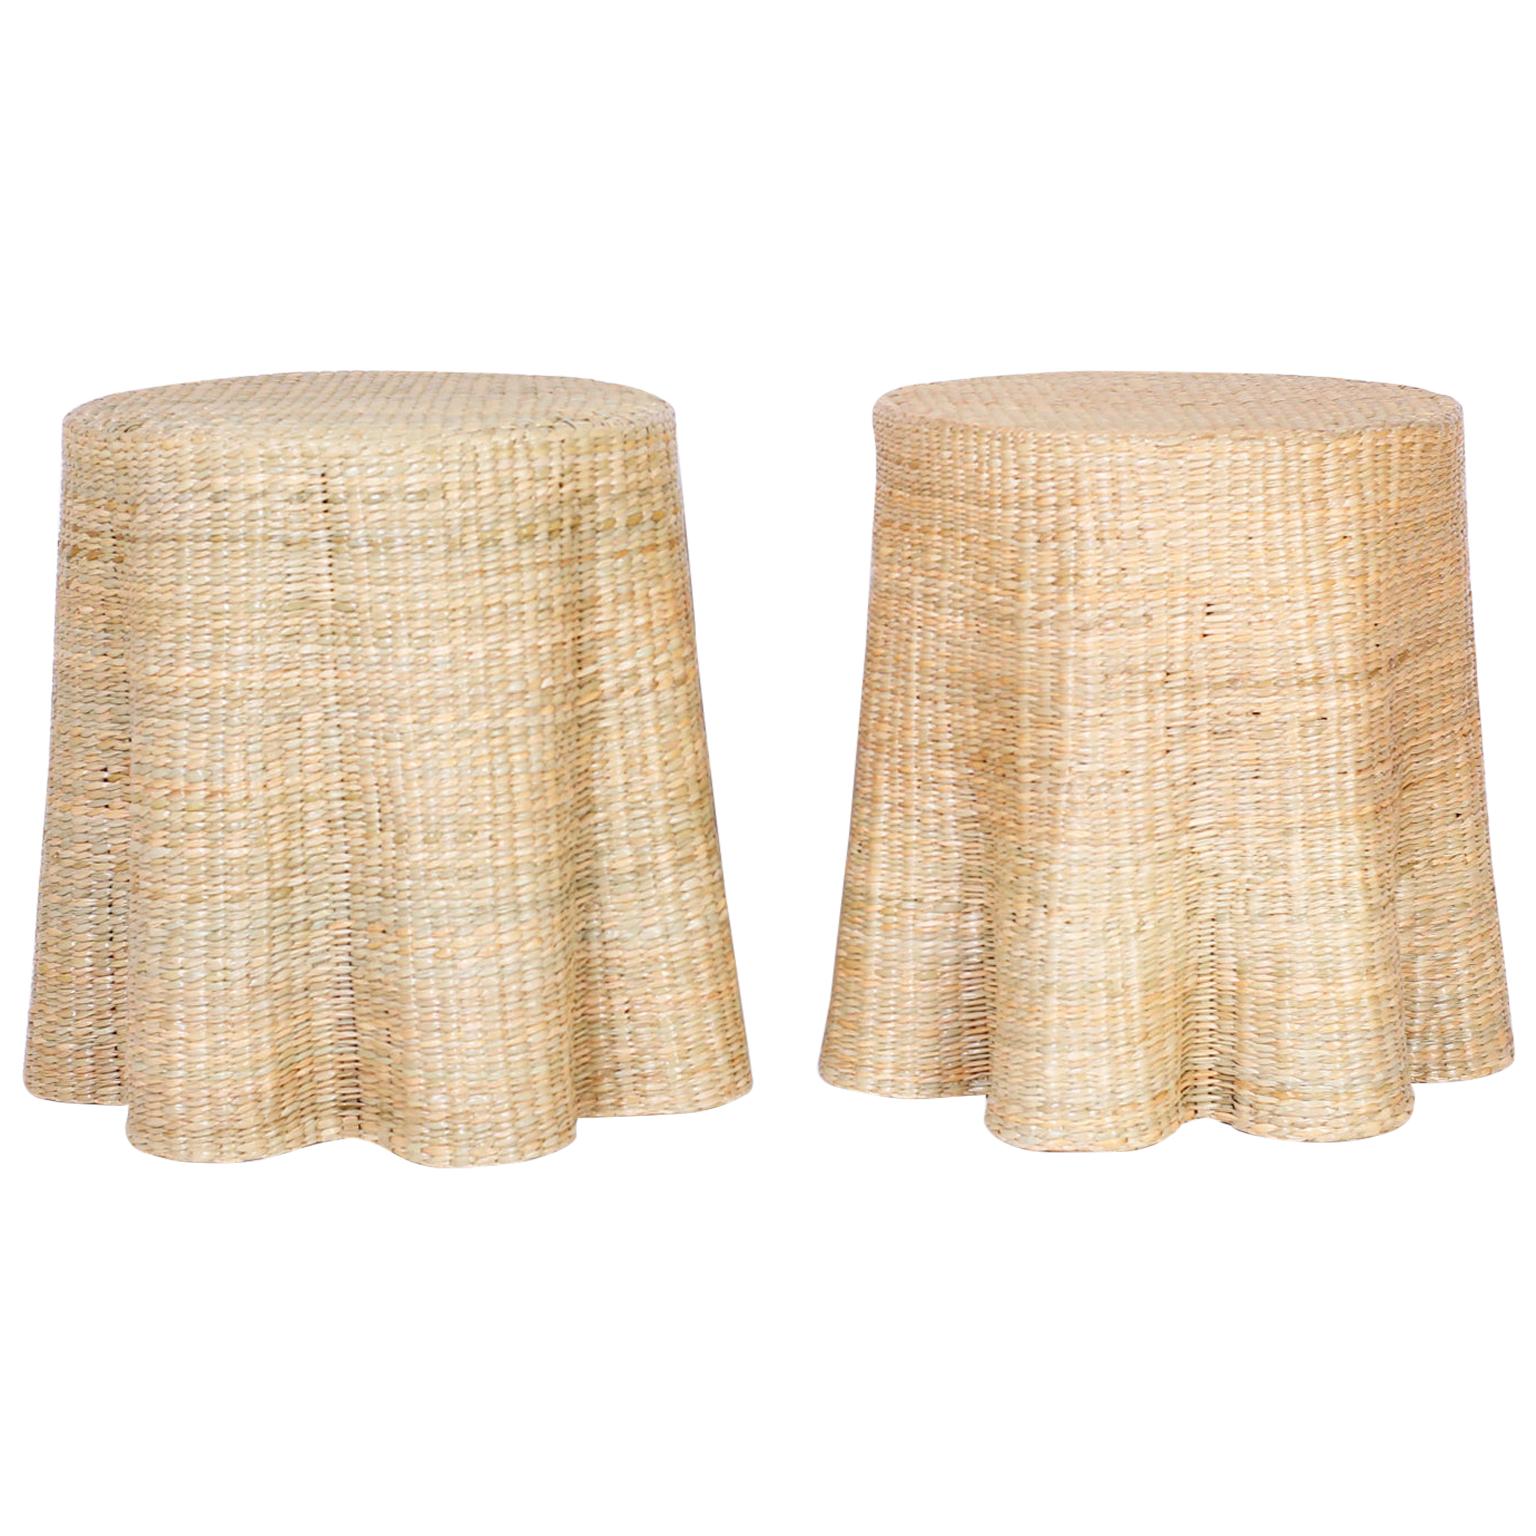 Pair of Wicker Drapery Ghost Tables or Stands from the FS Flores Collection